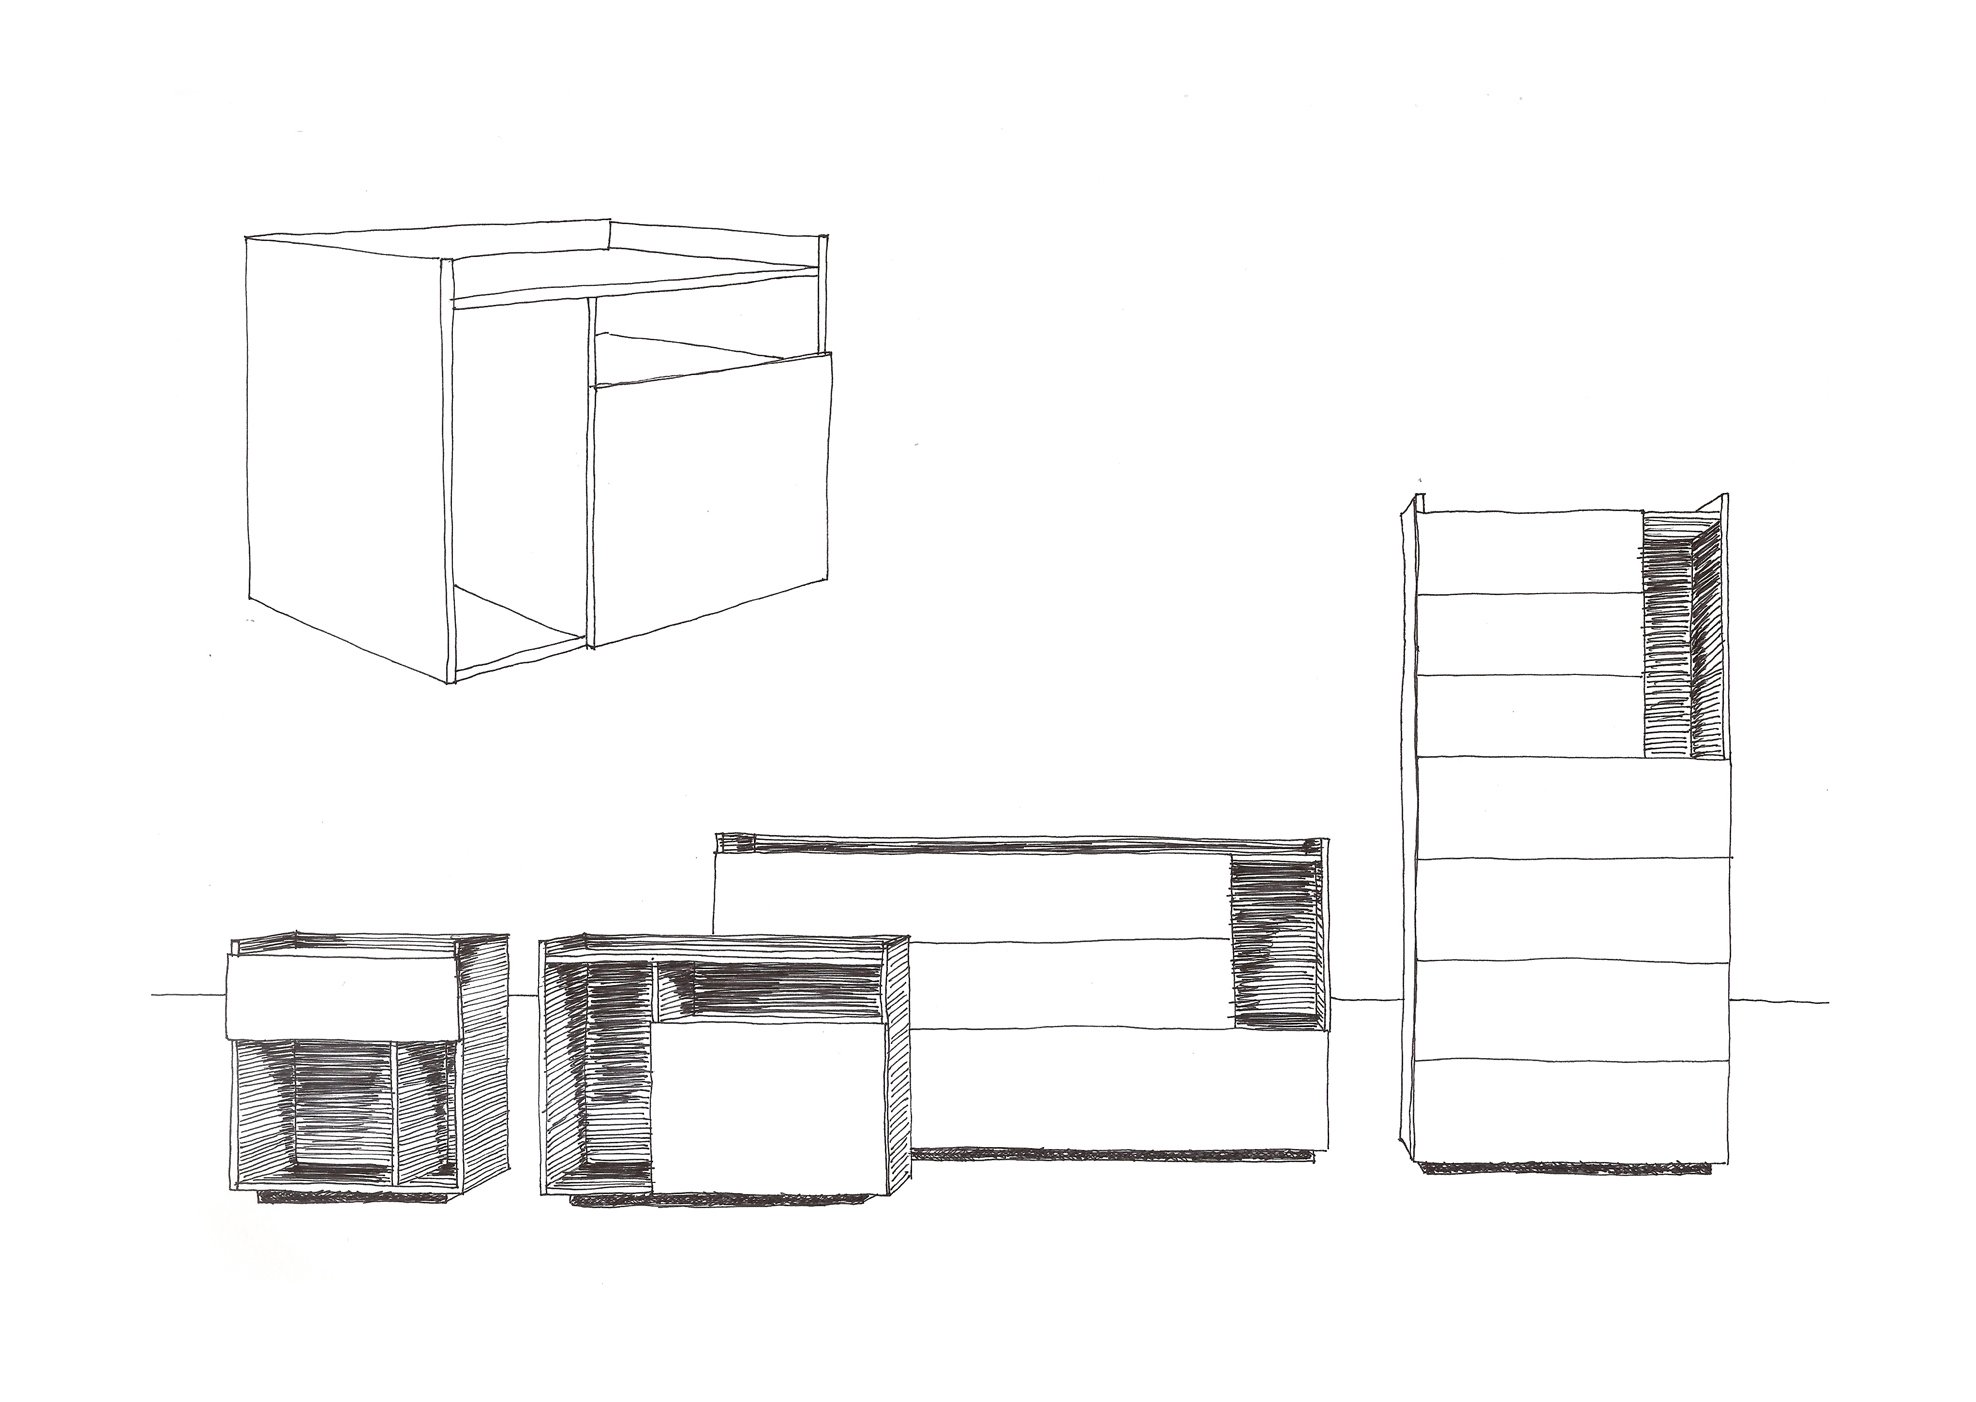 Sketch of the Tip drawer units by Debiasi Sandri for Lema